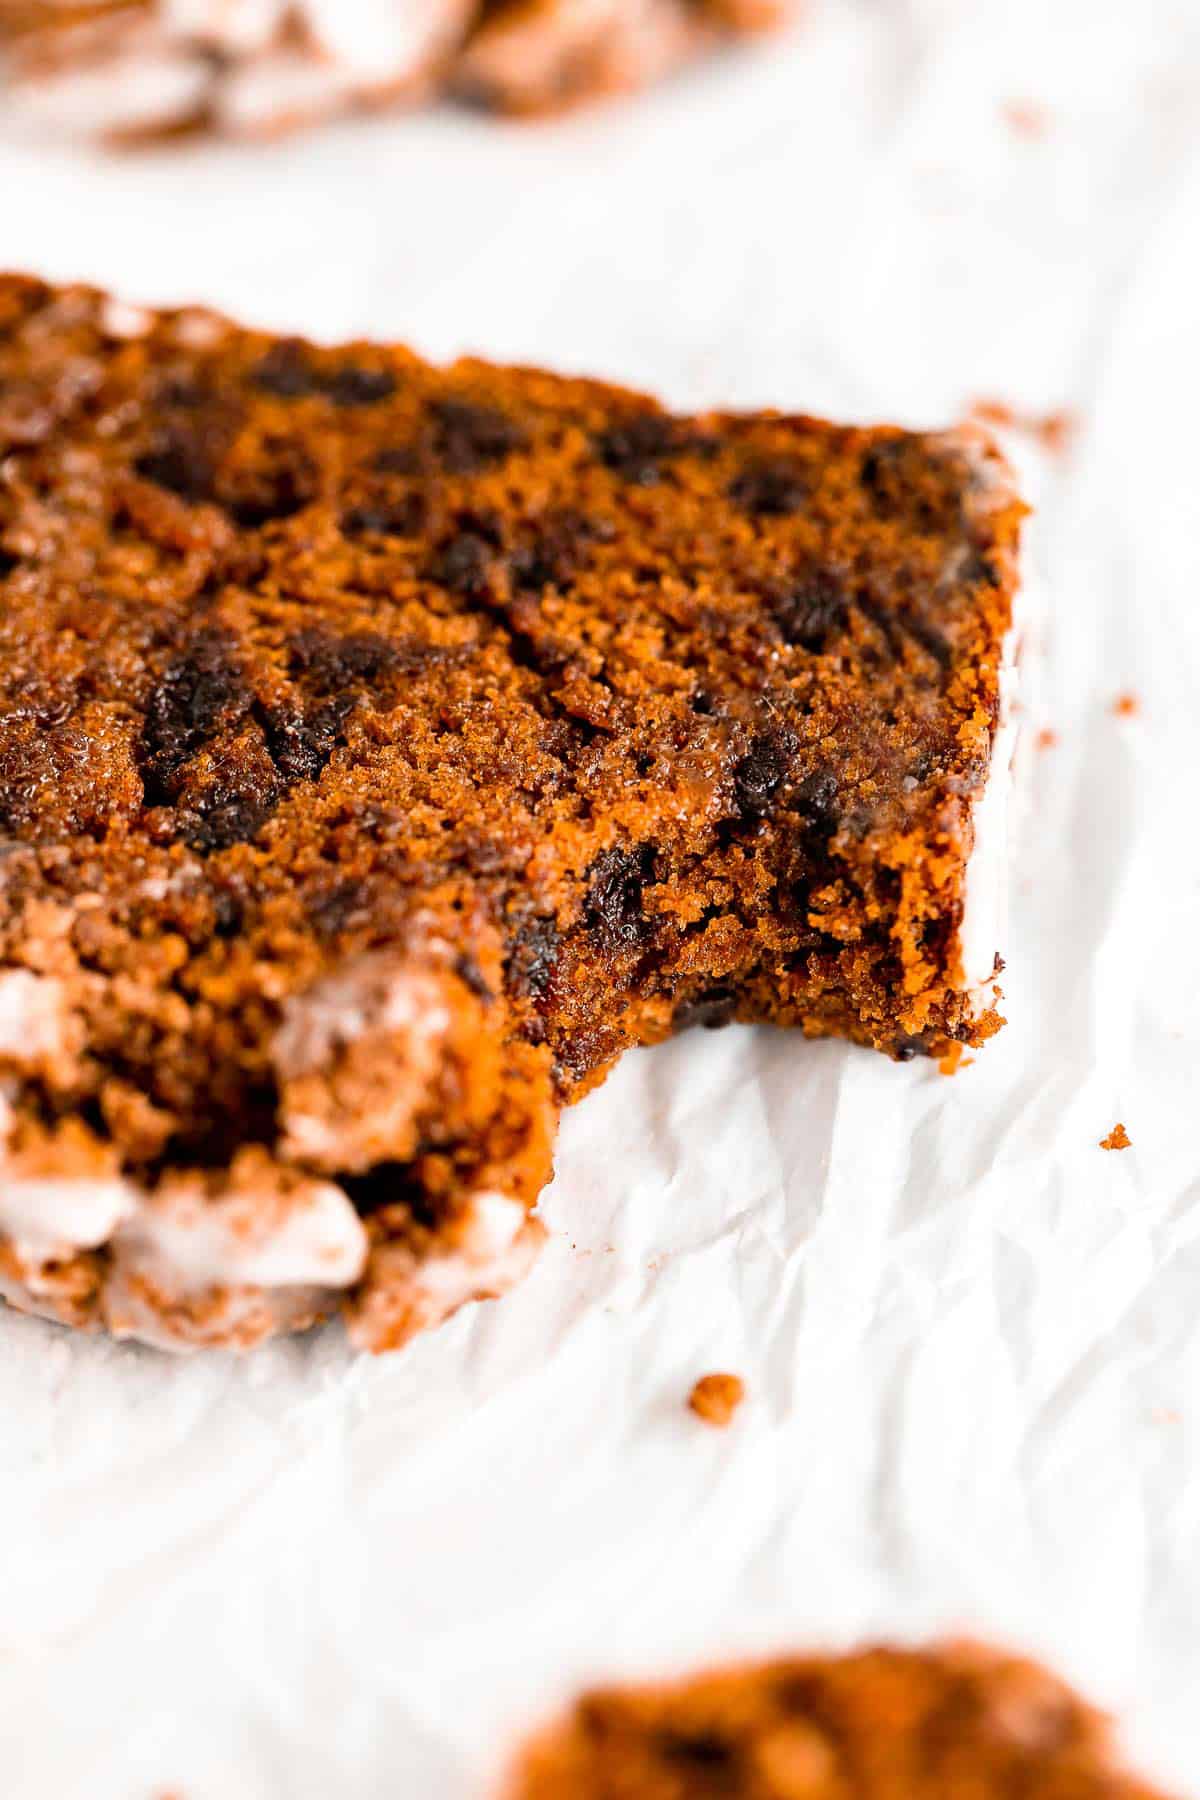 up close image of the pumpkin bread with a bite taken out to show texture